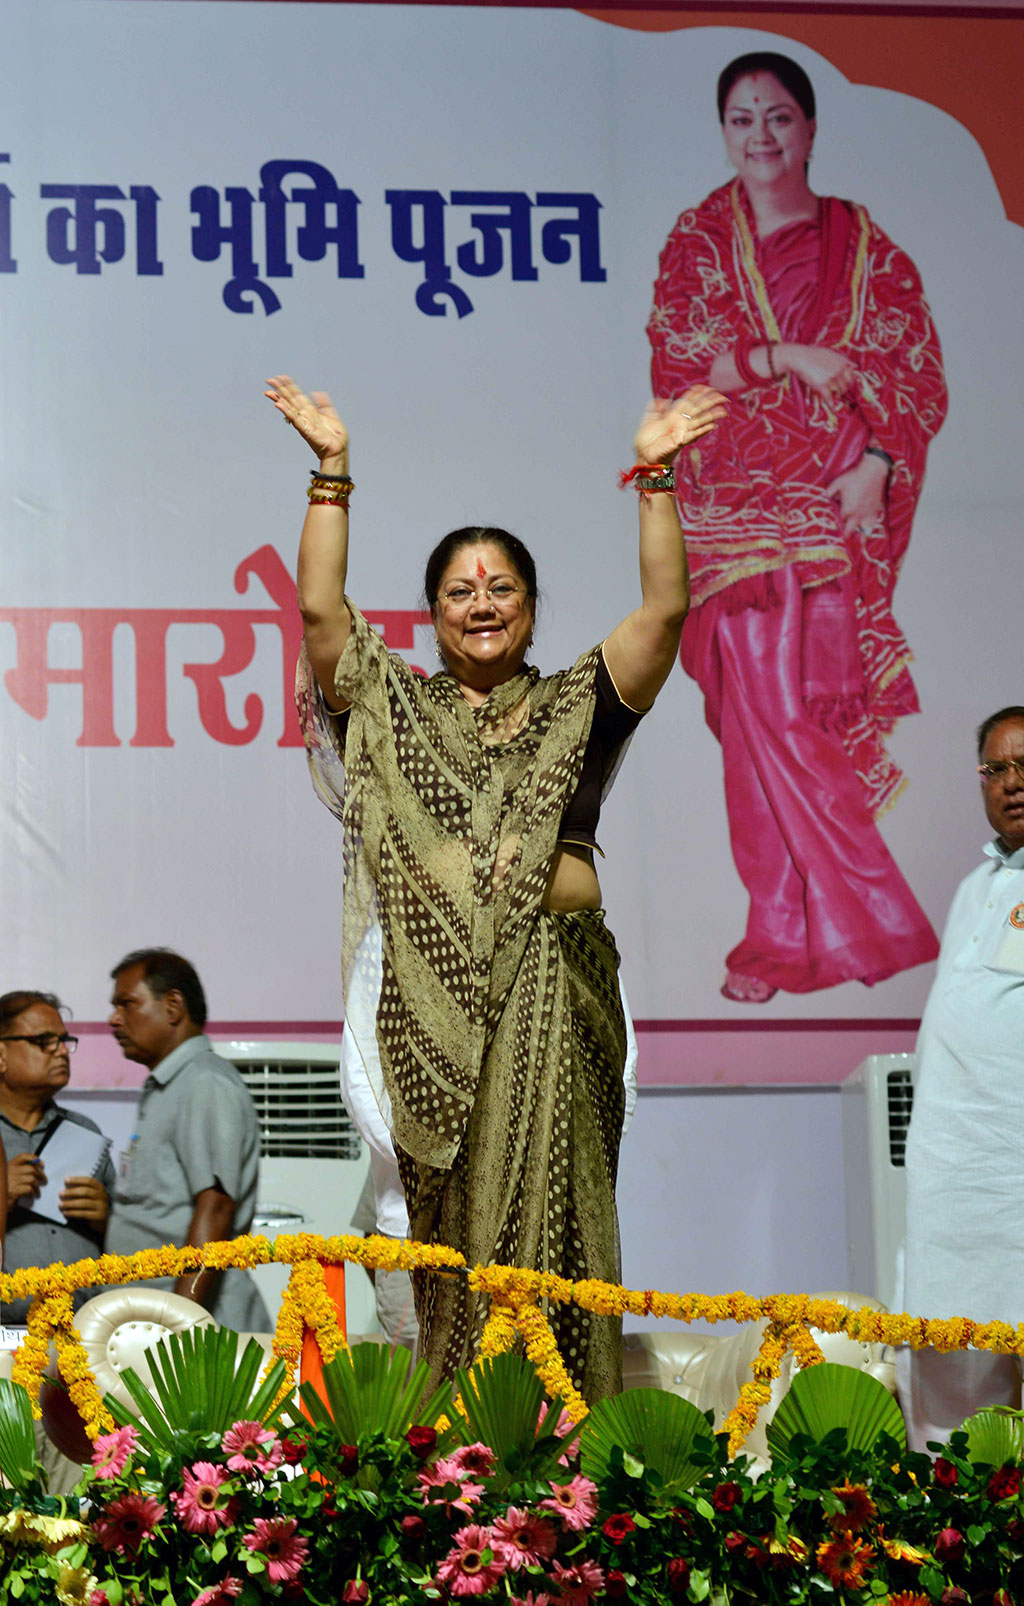 Vasundhara Raje - Congress set up only Stone in 55 years, we brought on the state of development Trek 4